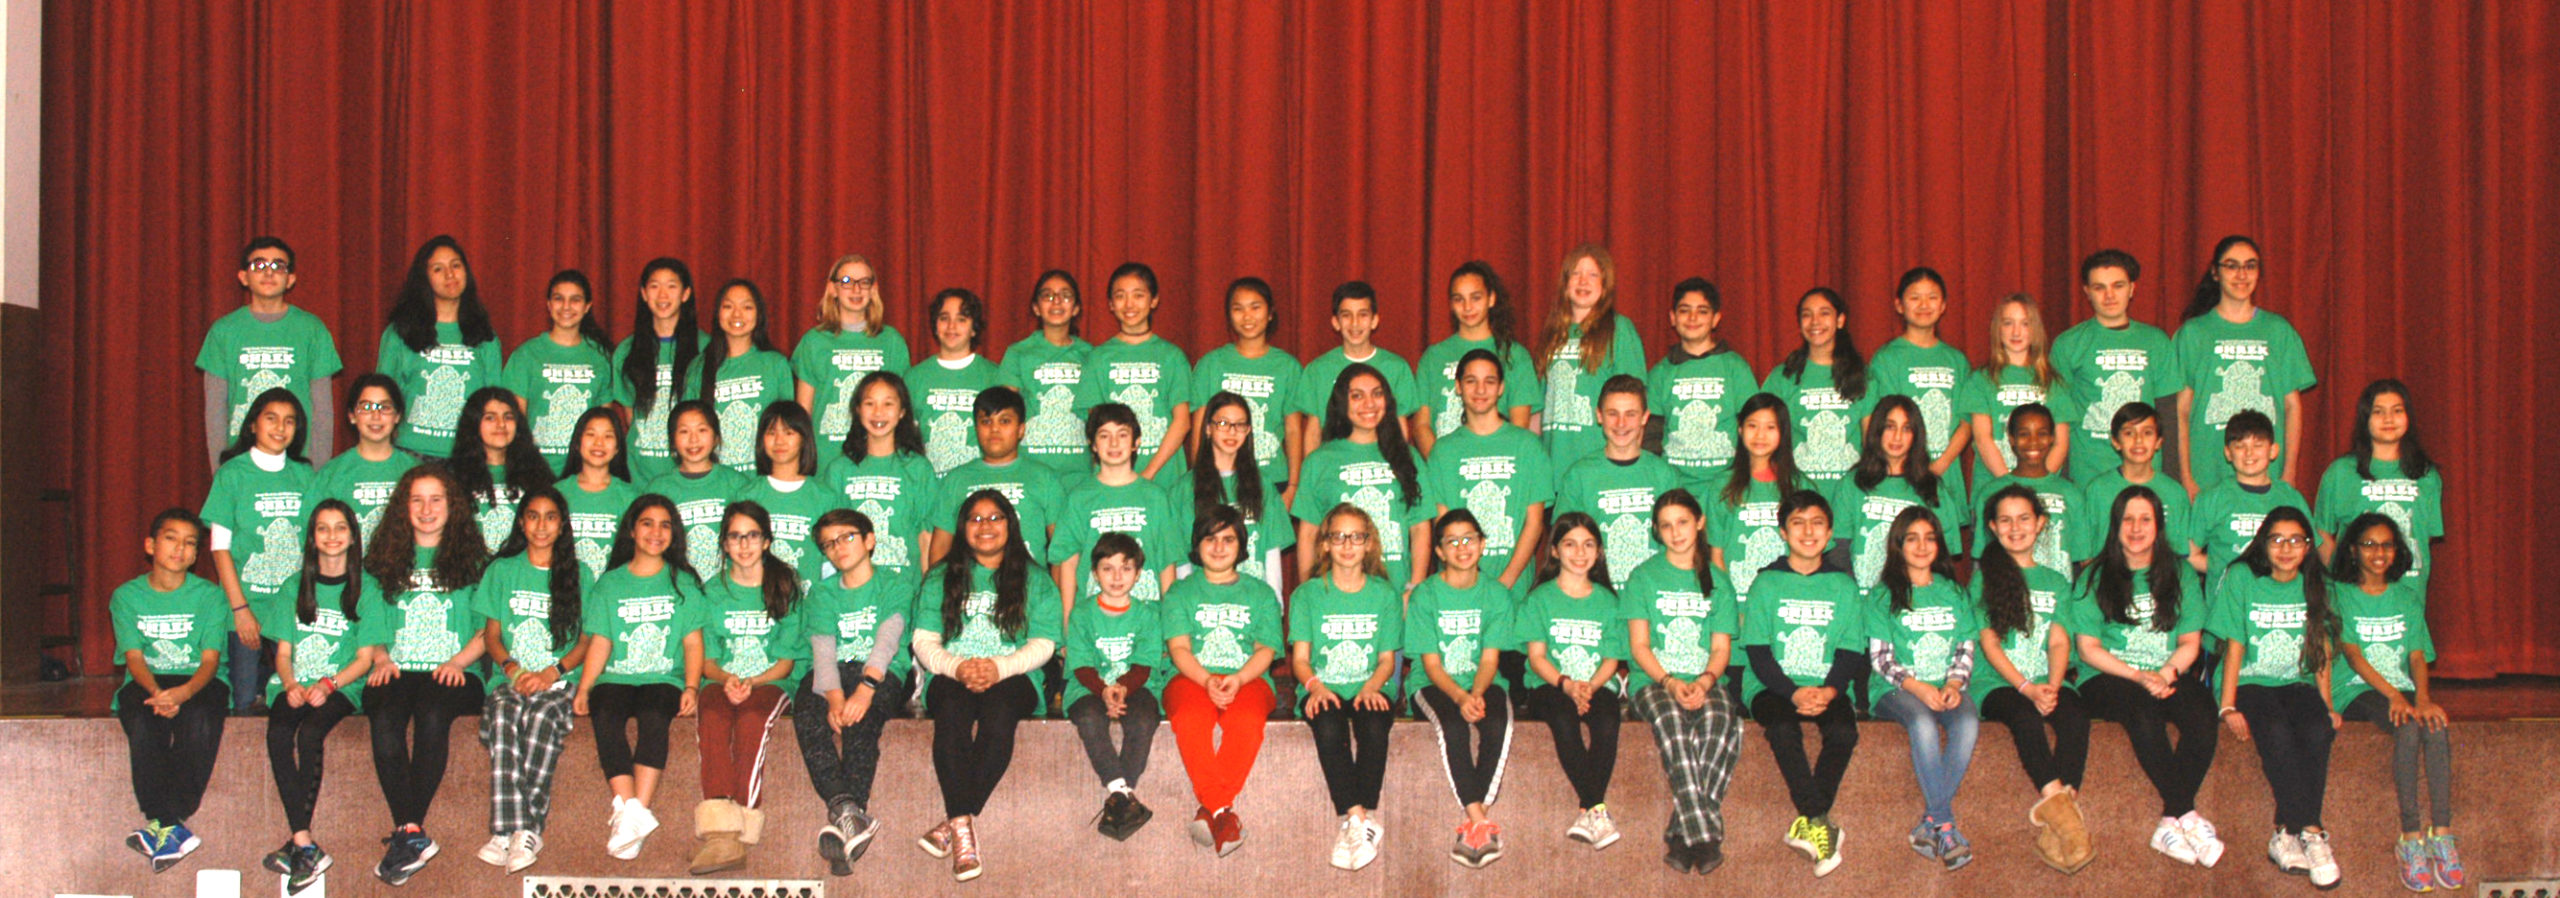 North Middle School students will present Shrek the Musical on March 14 and 15. (Photo by William Cancellare)